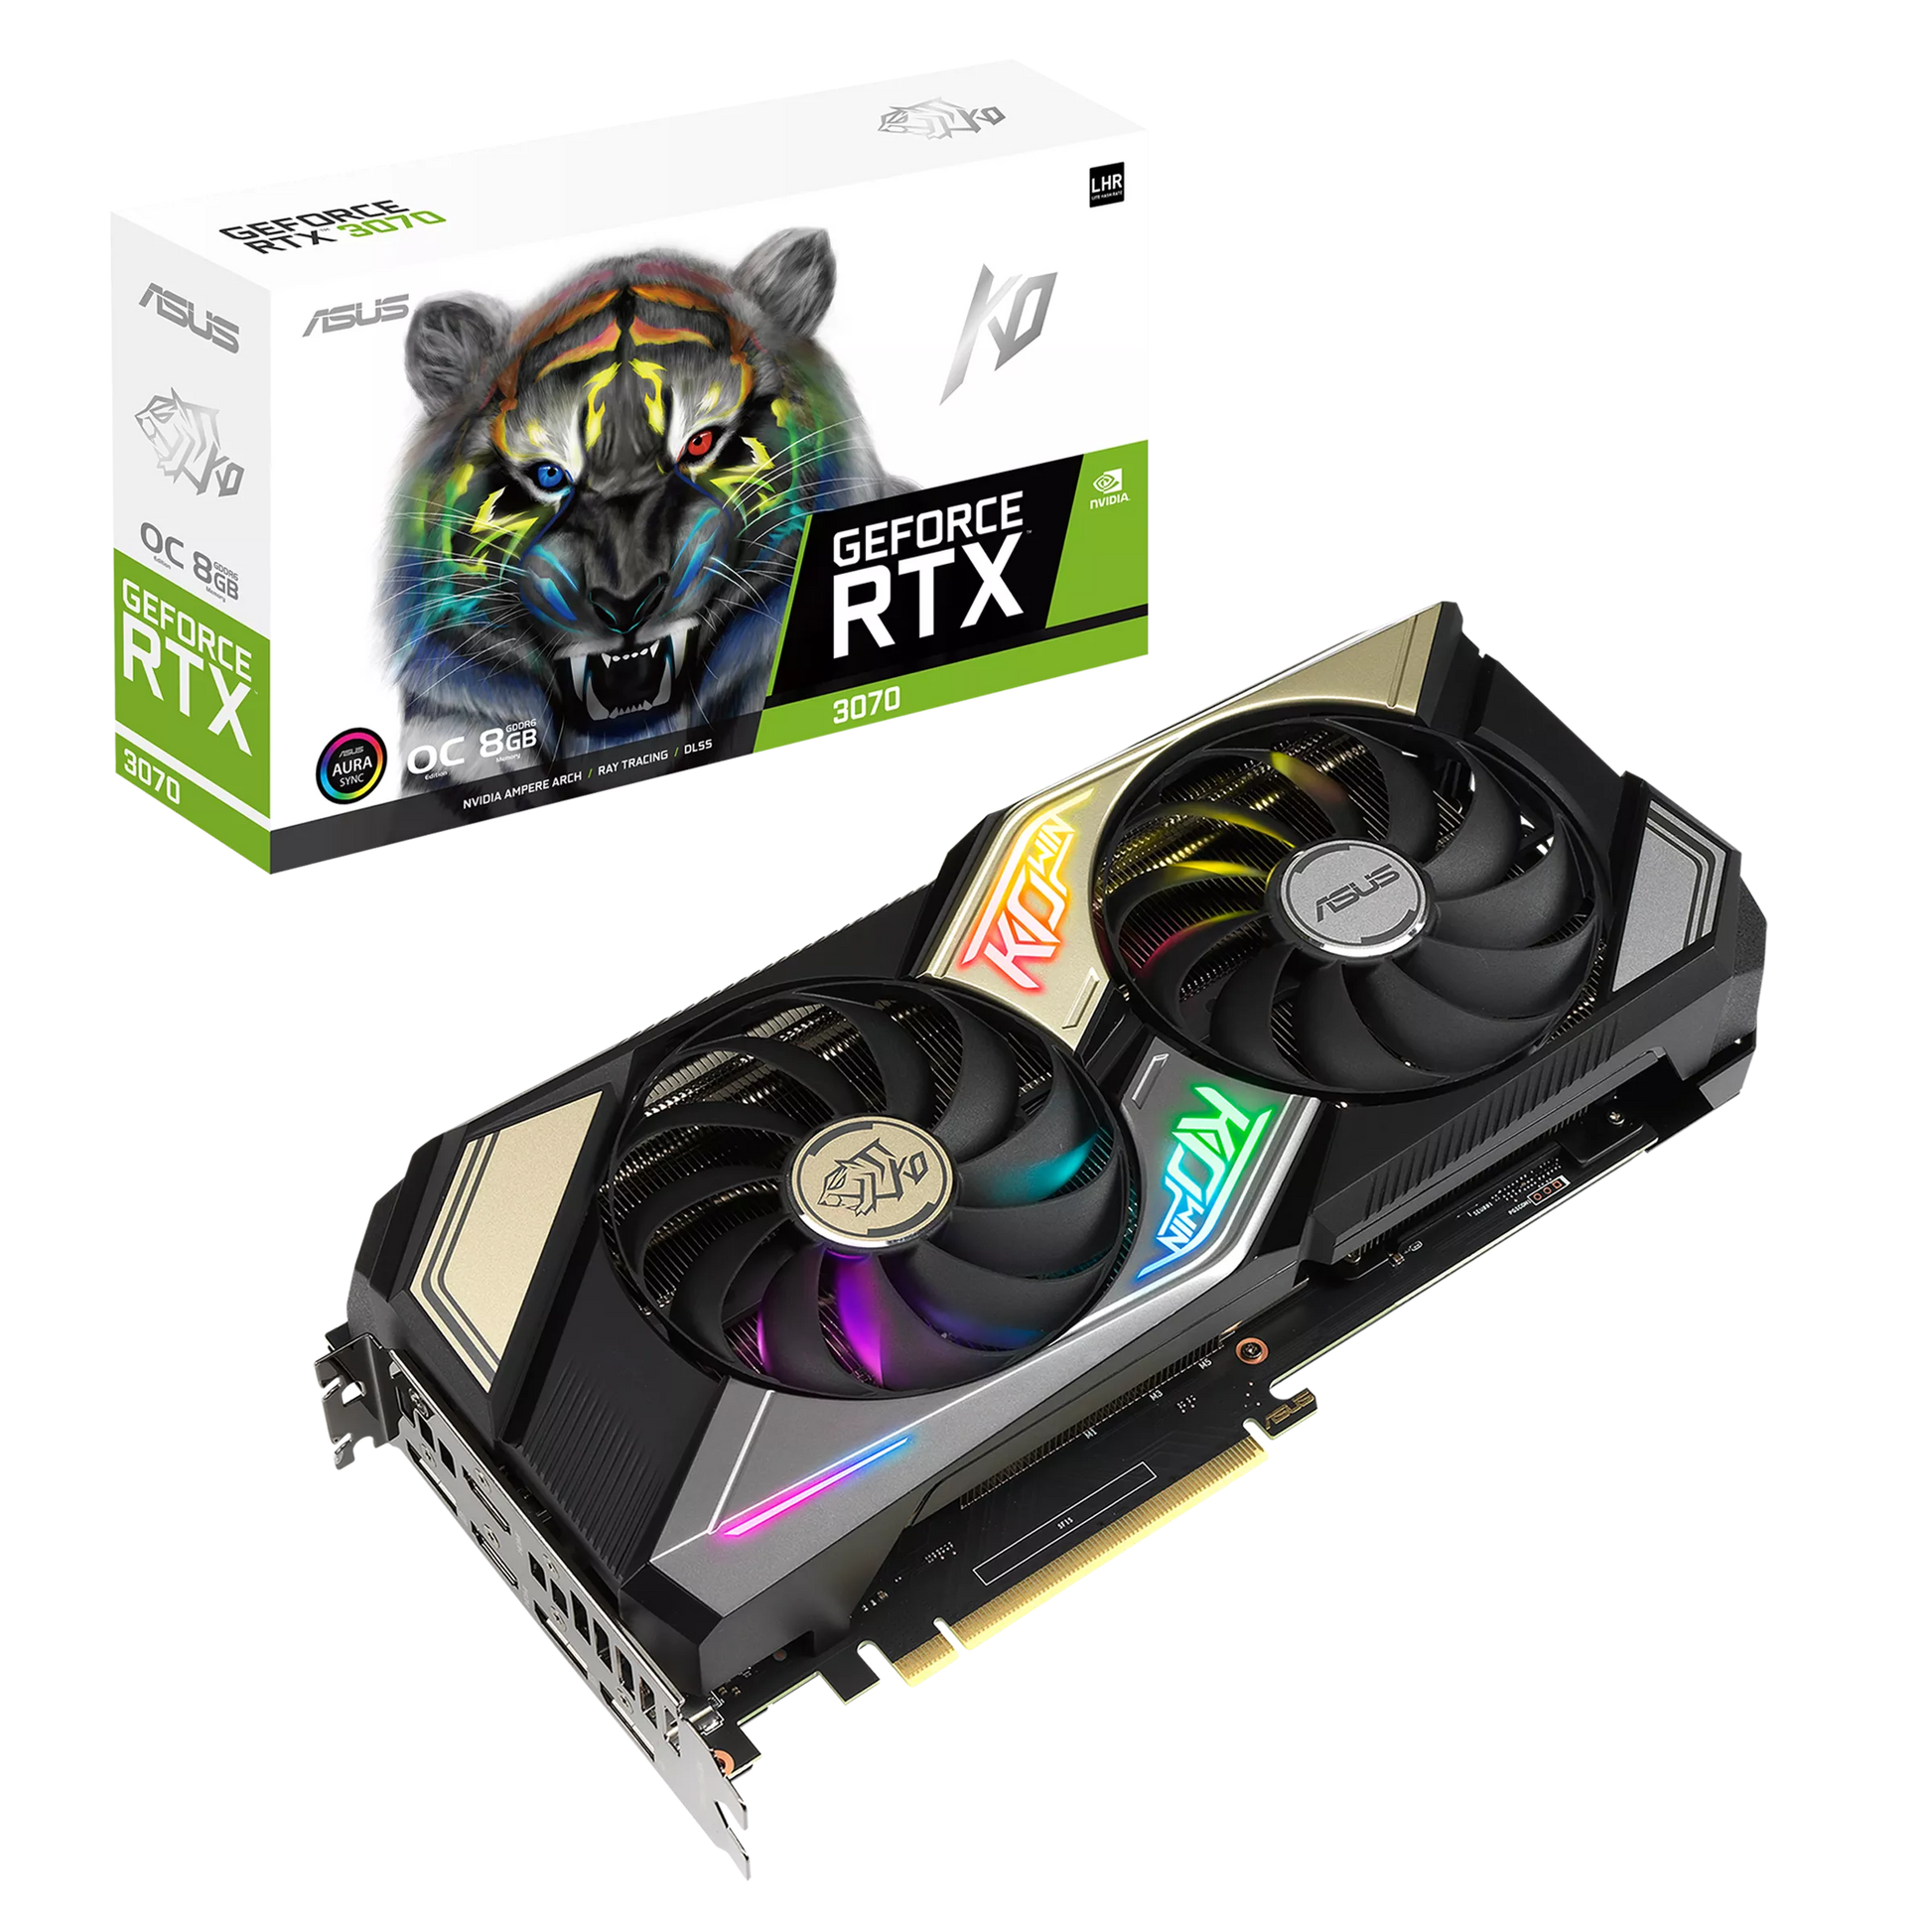 ASUS KO GeForce RTX 3070 V2 OC Edition Graphics Card-GRAPHICS CARD-ASUS-computerspace